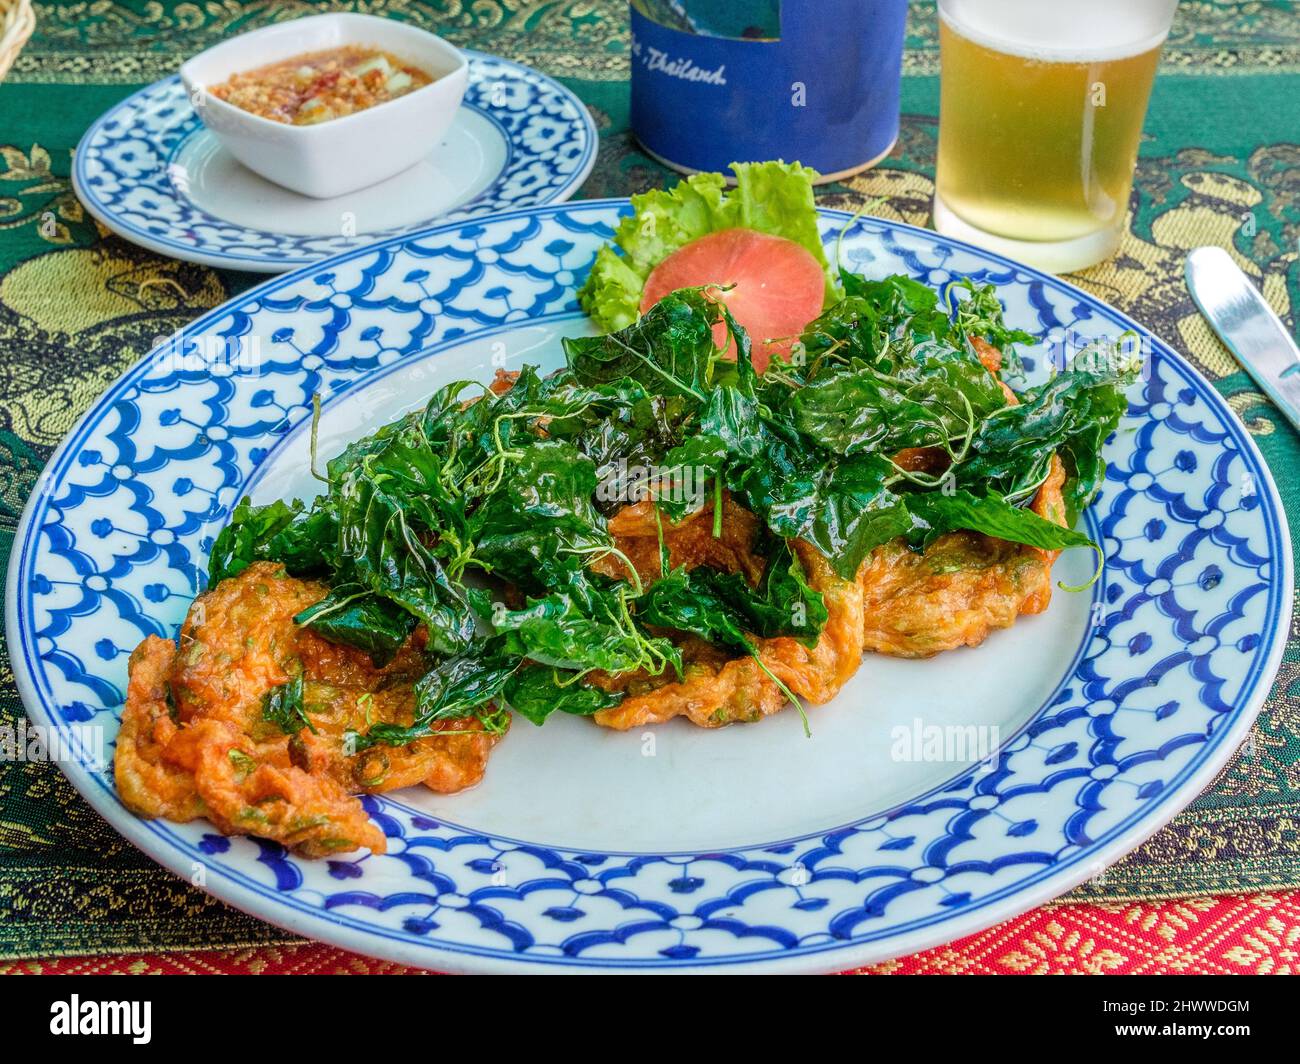 Fishcakes Thay style served at a restaurant in Hua Hin Stock Photo